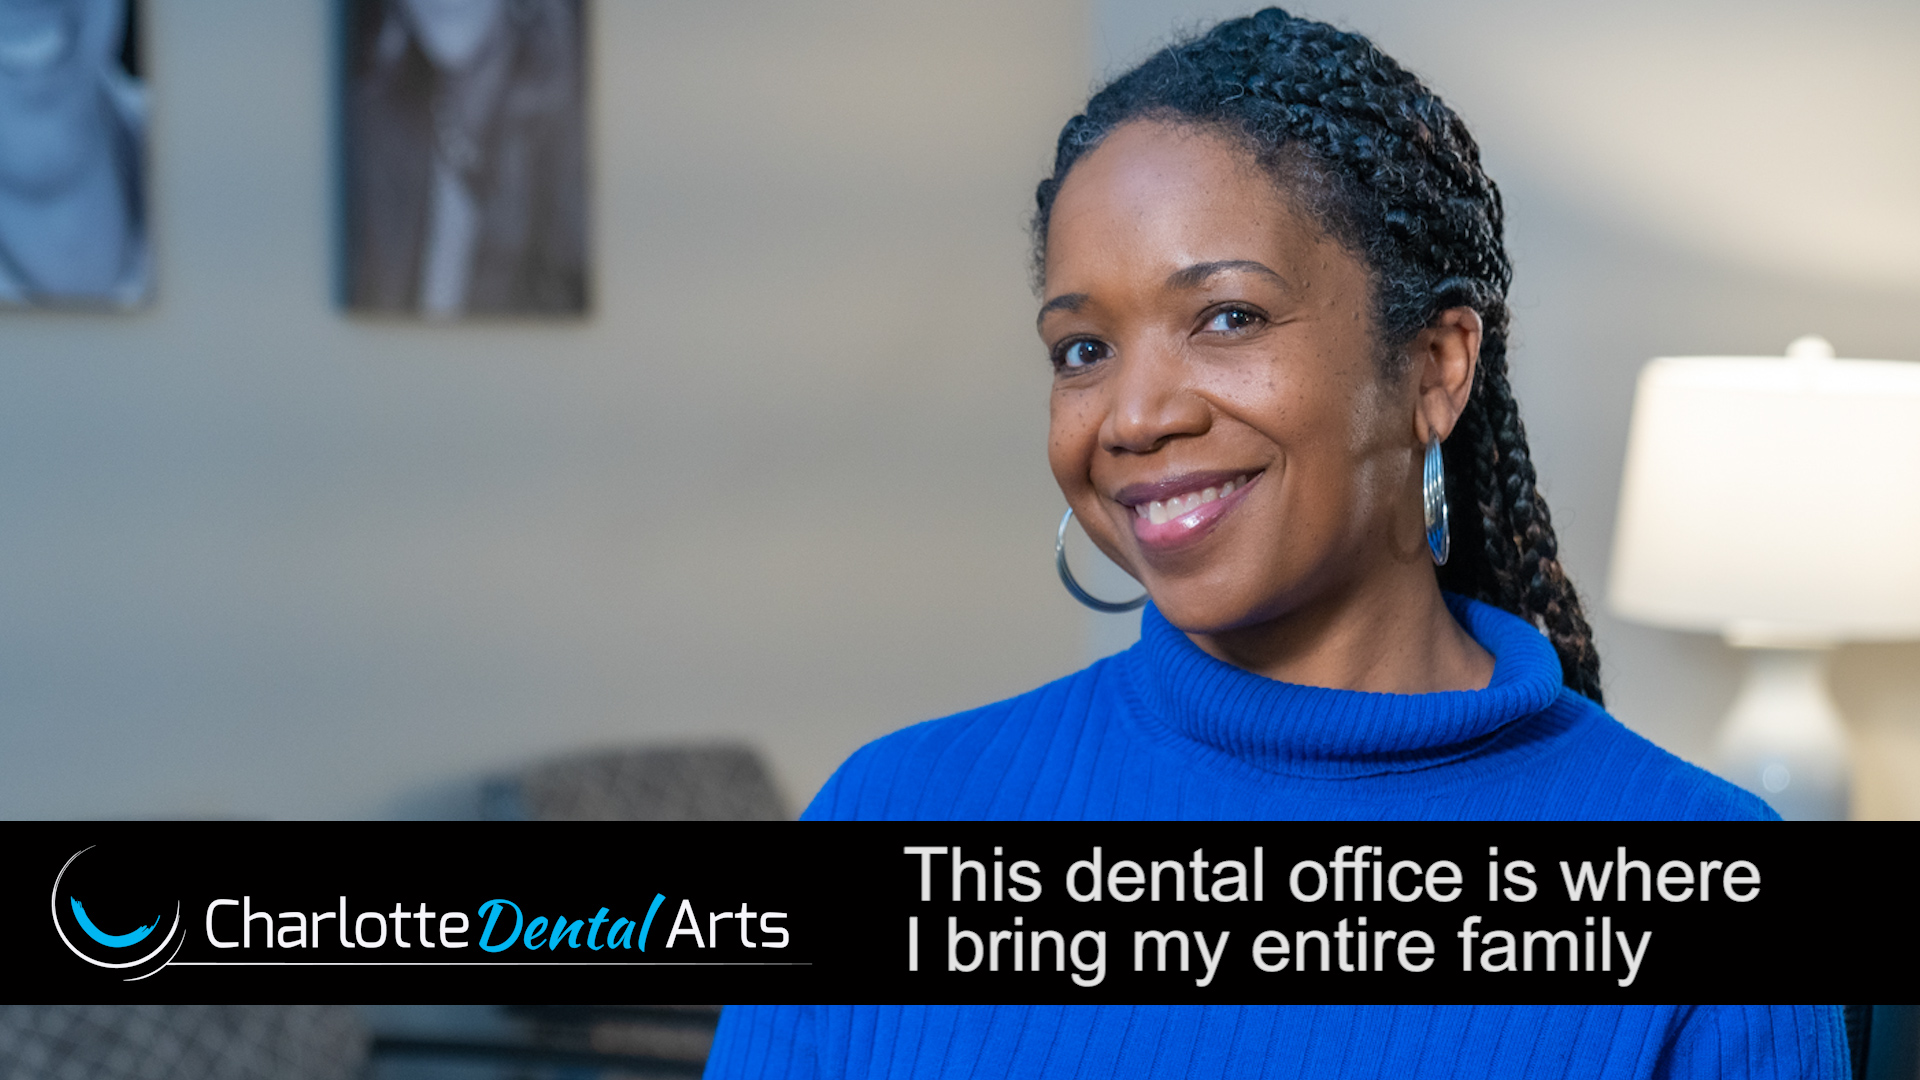 A joyful patient smiling broadly in a YouTube thumbnail, her radiant white smile serving as a glowing testimonial to her dental transformation.